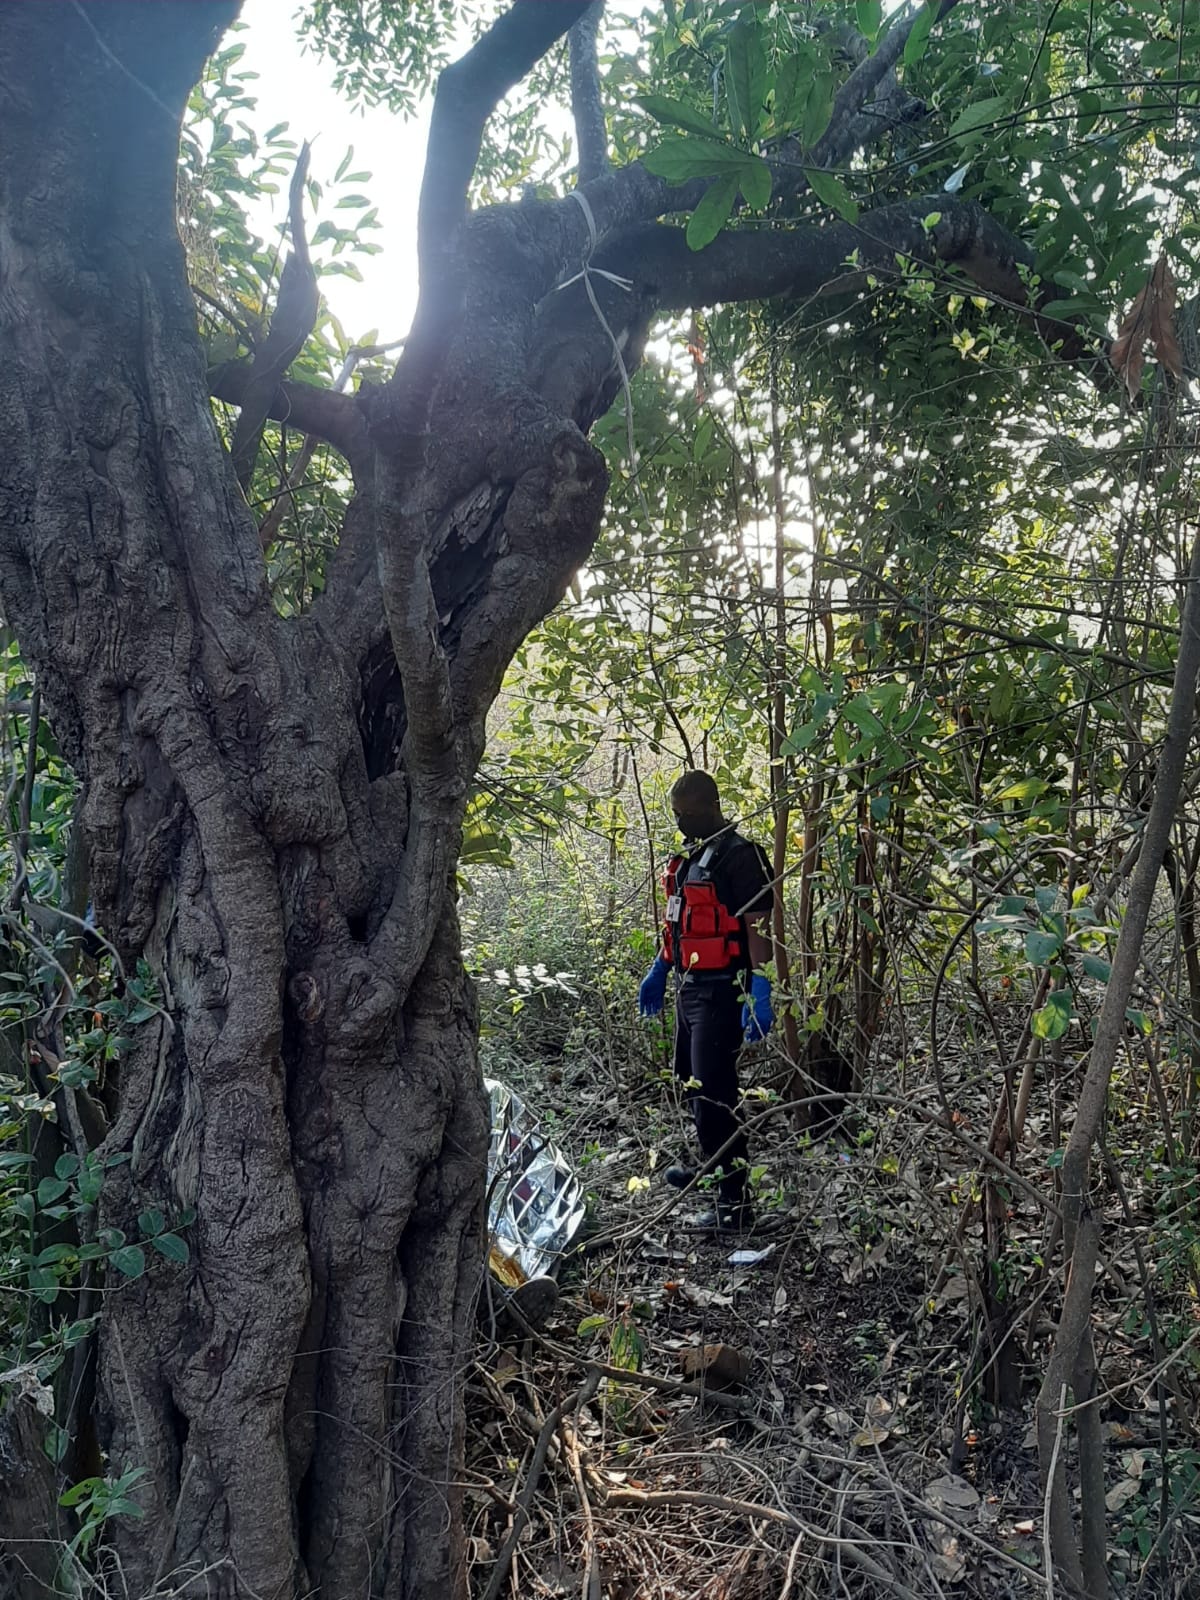 Passerby Discovers Man Hanging From Tree at Waterloo in KZN